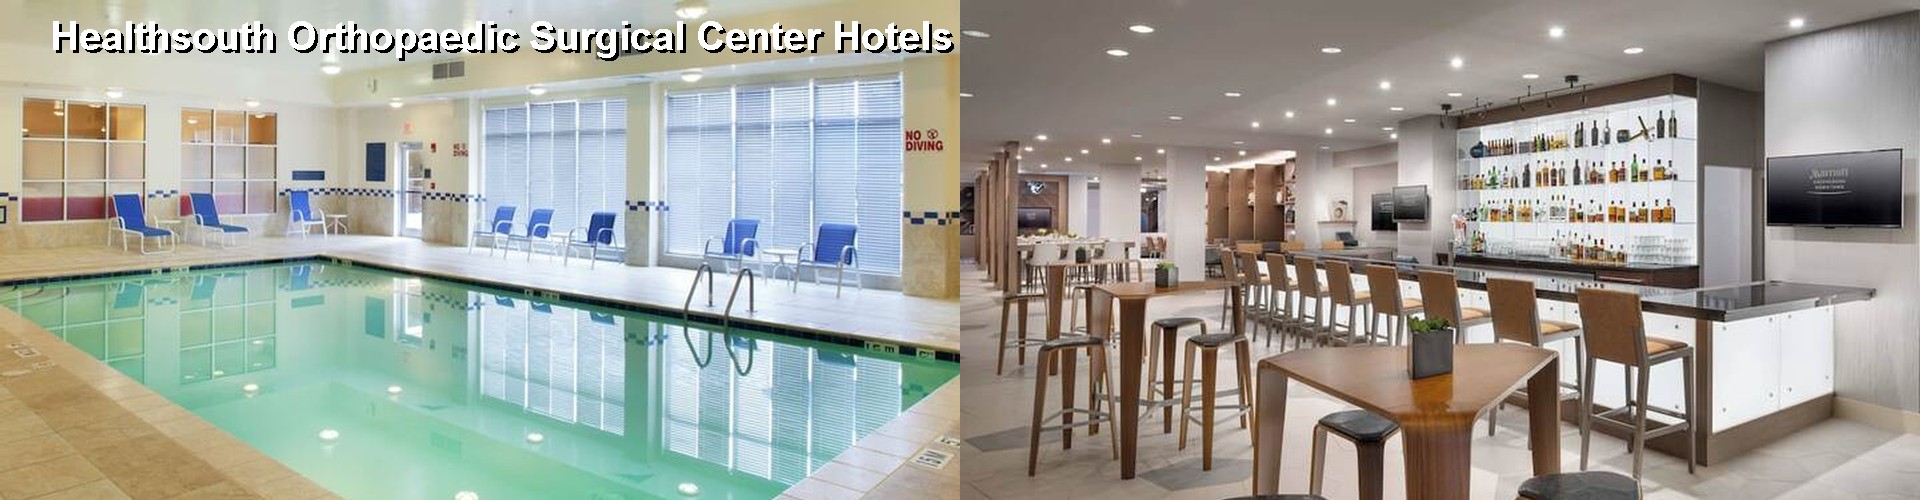 5 Best Hotels near Healthsouth Orthopaedic Surgical Center